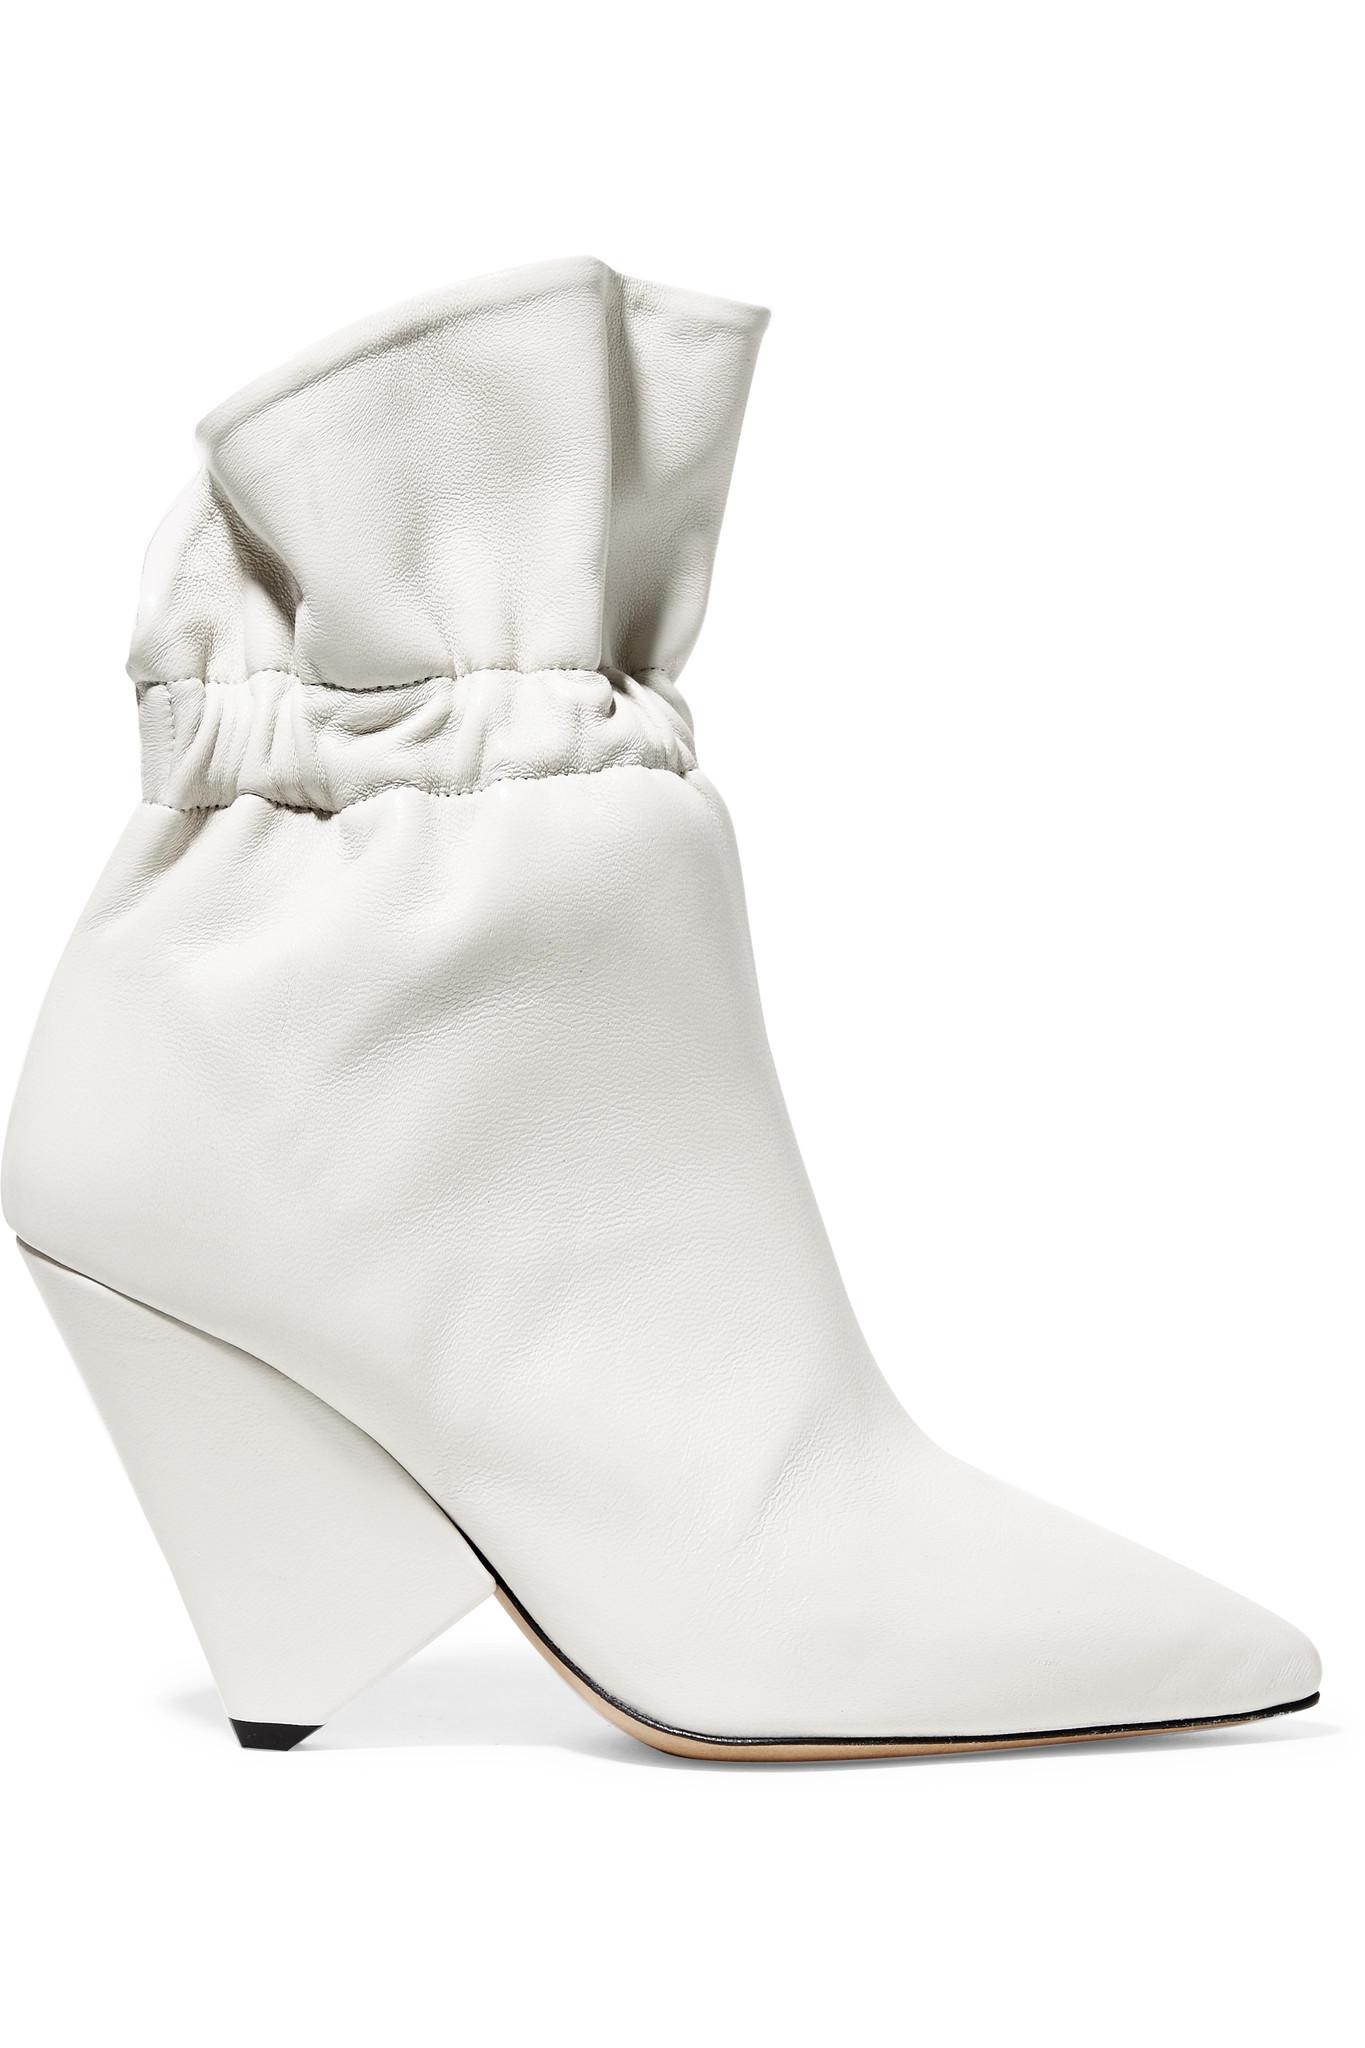 Isabel Marant Lileas Ruched Leather Ankle Boots in Ivory (White) - Lyst